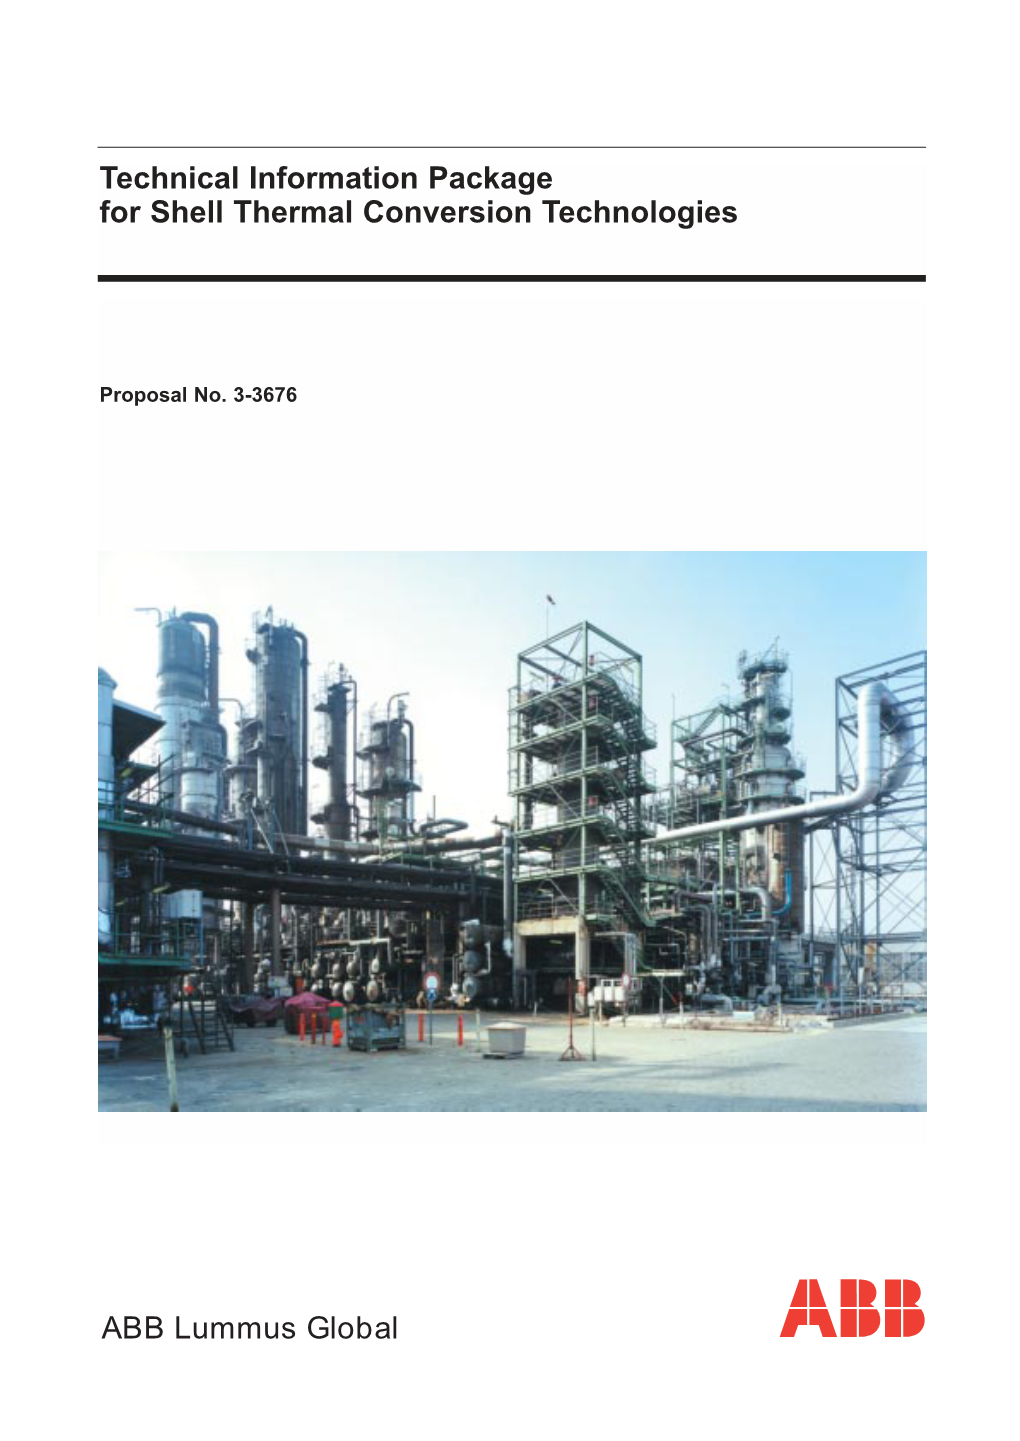 ABB Lummus Global Technical Information Package for Shell